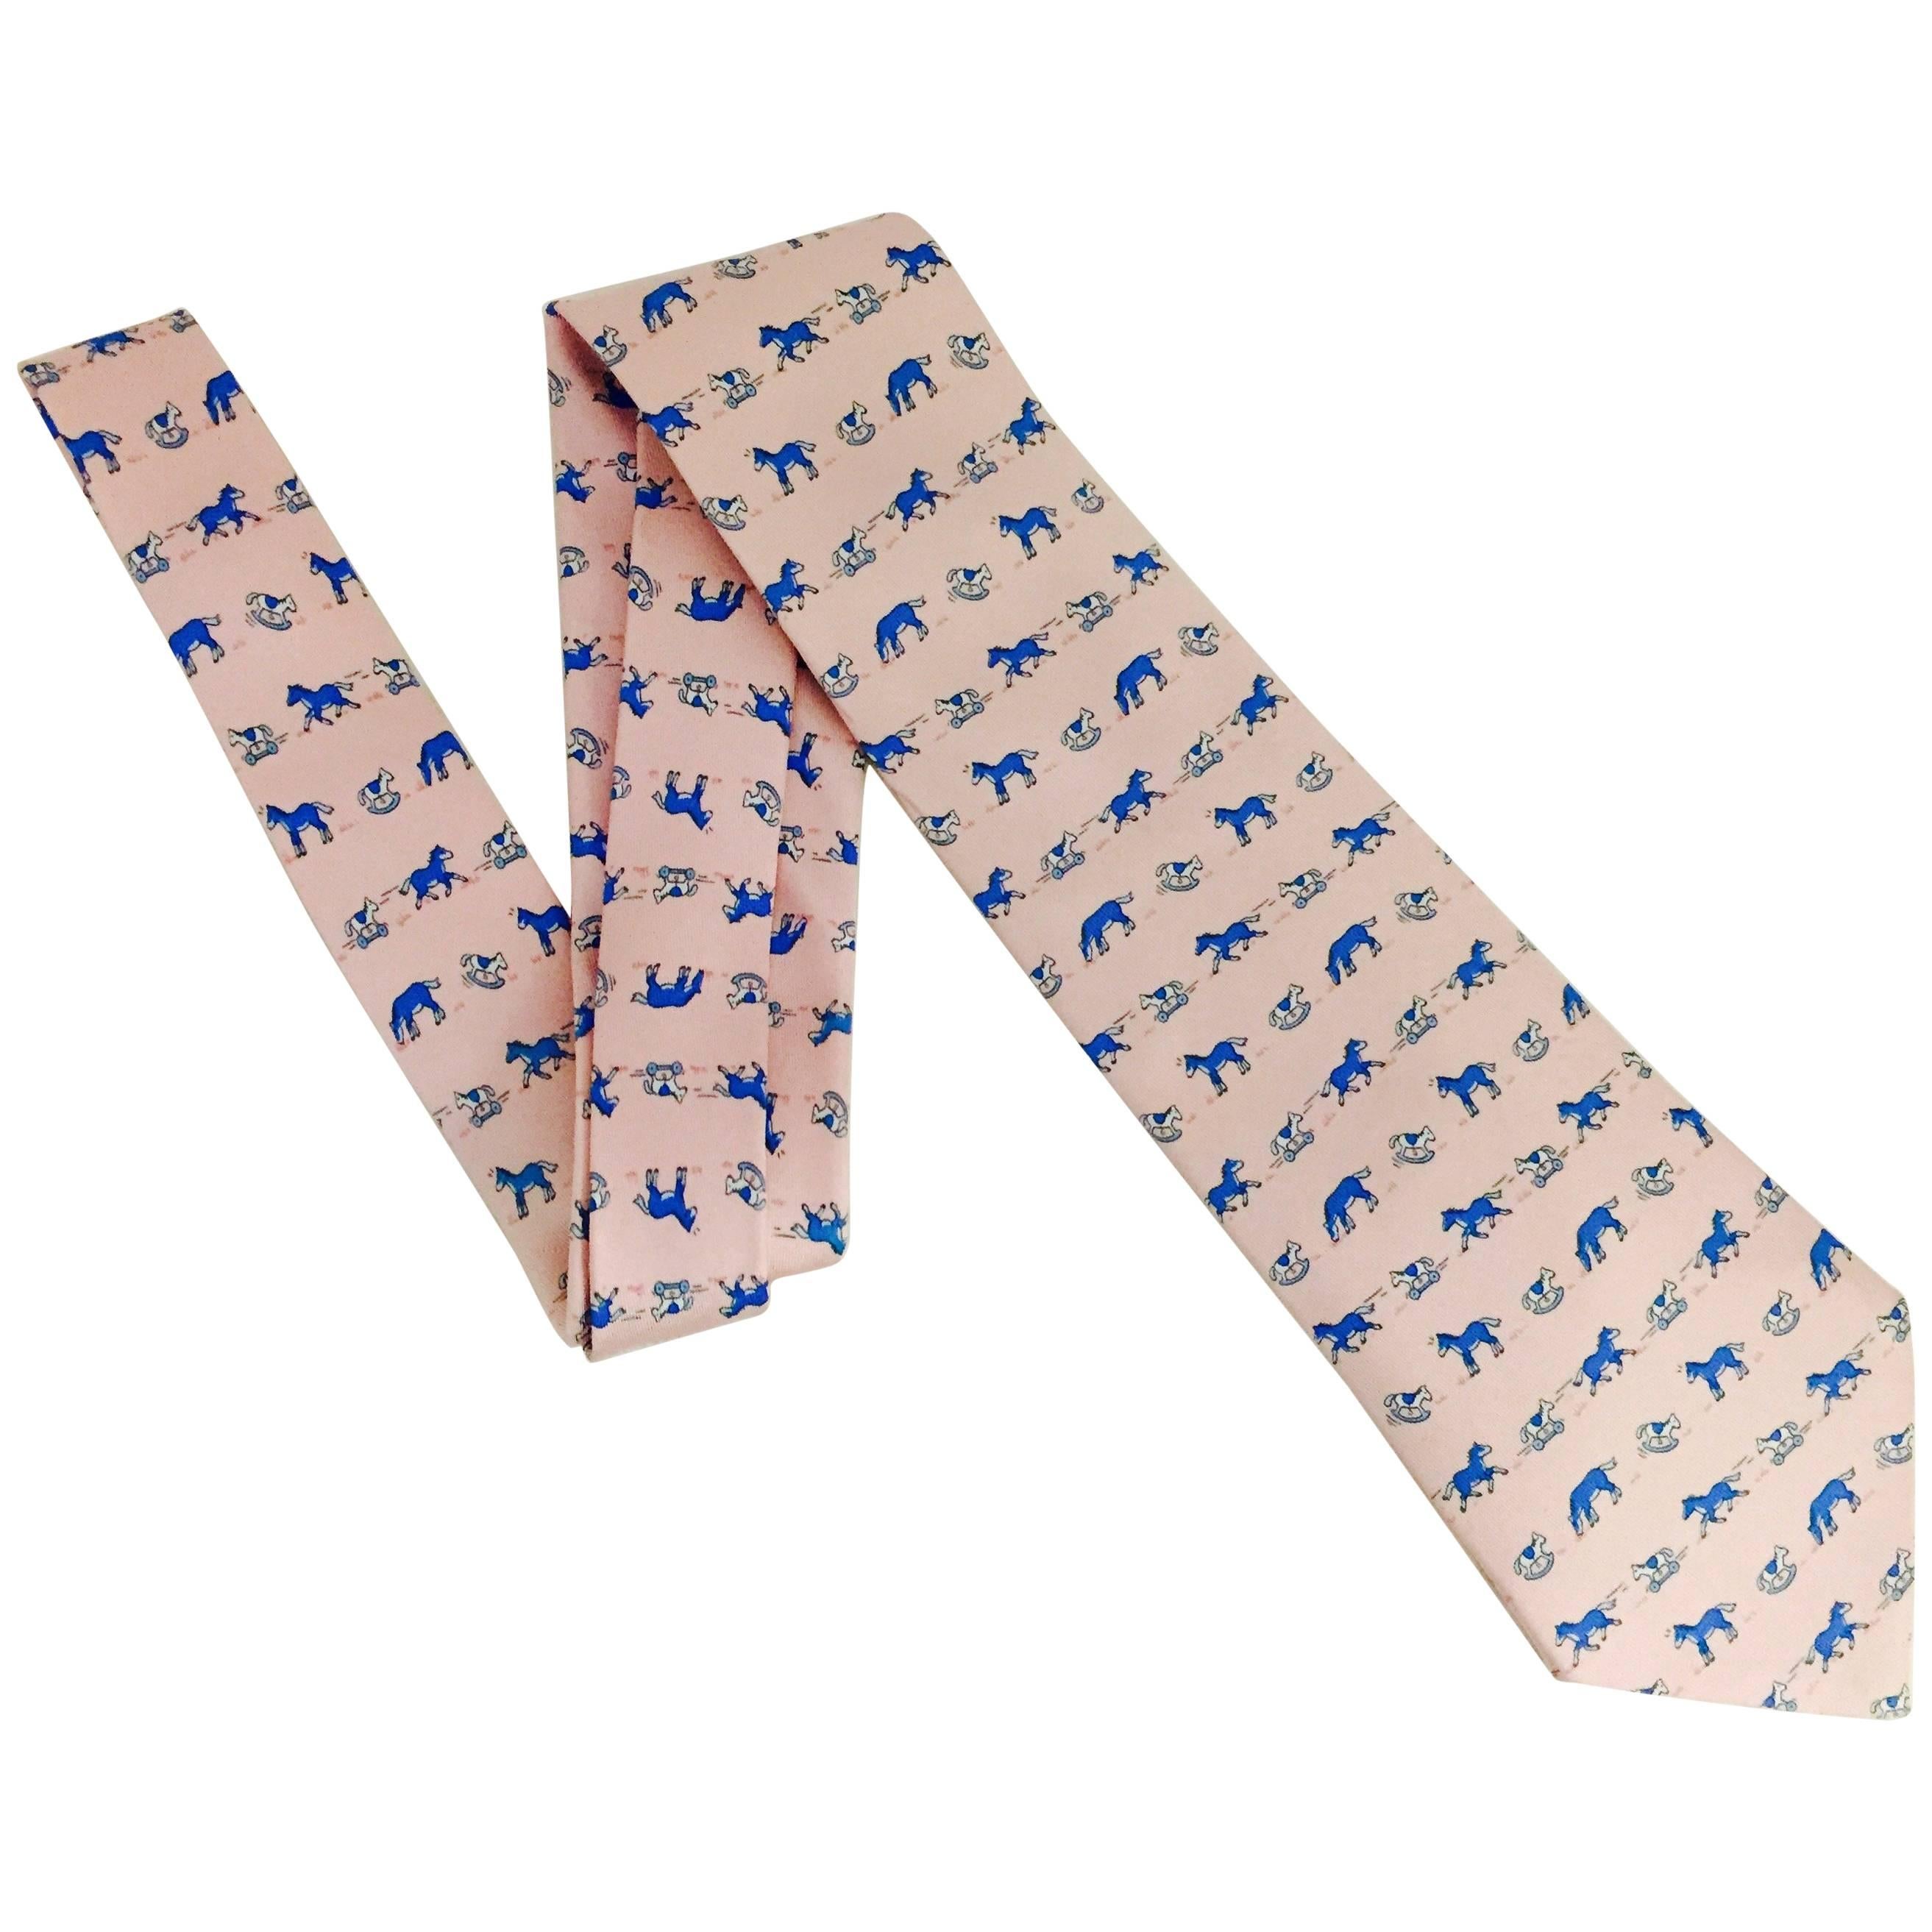 Men's Vintage Hermes Tie, OH BABY! Adorable Pony & Rocking Horse Whimsy